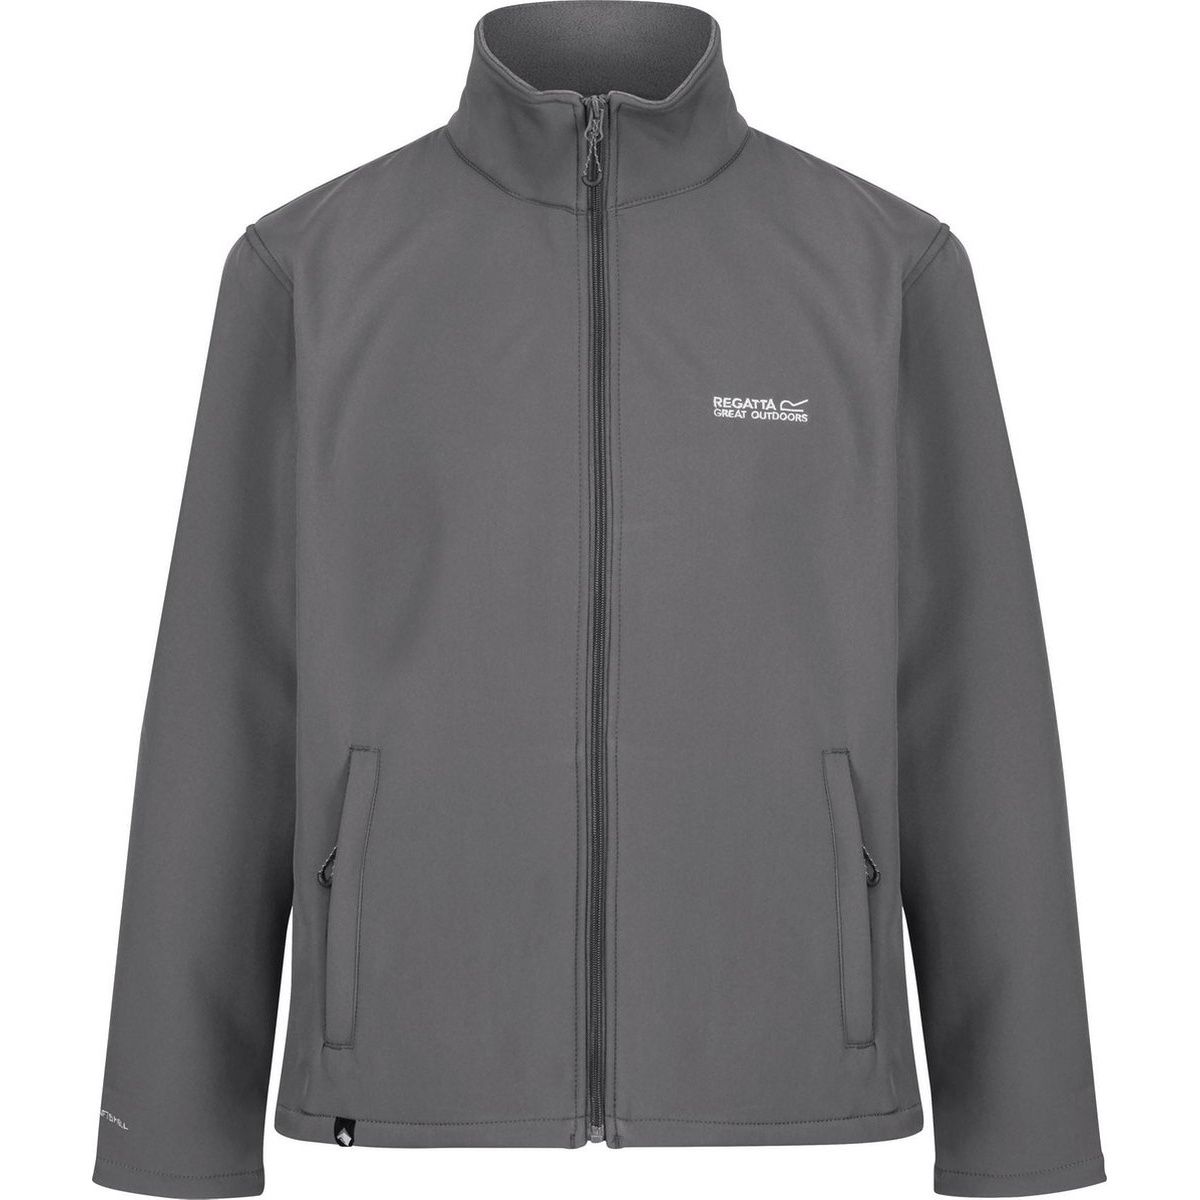 The mens Cera II is a best-selling Softshell jackets. Offering great value and quality across four seasons, you can wear it as a light jacket on mild weather days or as an insulating mid-layer during colder months. The stretchy fabric has a DWR (Durable Water Repellent) finish to guard against wind and showers, and a soft, warm backing for added comfort. Complete with two zipped pockets to keep car keys/mid-walk sweets/dog treats/phones safe. 100% Polyester. Regatta Mens sizing (chest approx): XS (35-36in/89-91.5cm), S (37-38in/94-96.5cm), M (39-40in/99-101.5cm), L (41-42in/104-106.5cm), XL (43-44in/109-112cm), XXL (46-48in/117-122cm), XXXL (49-51in/124.5-129.5cm), XXXXL (52-54in/132-137cm), XXXXXL (55-57in/140-145cm).